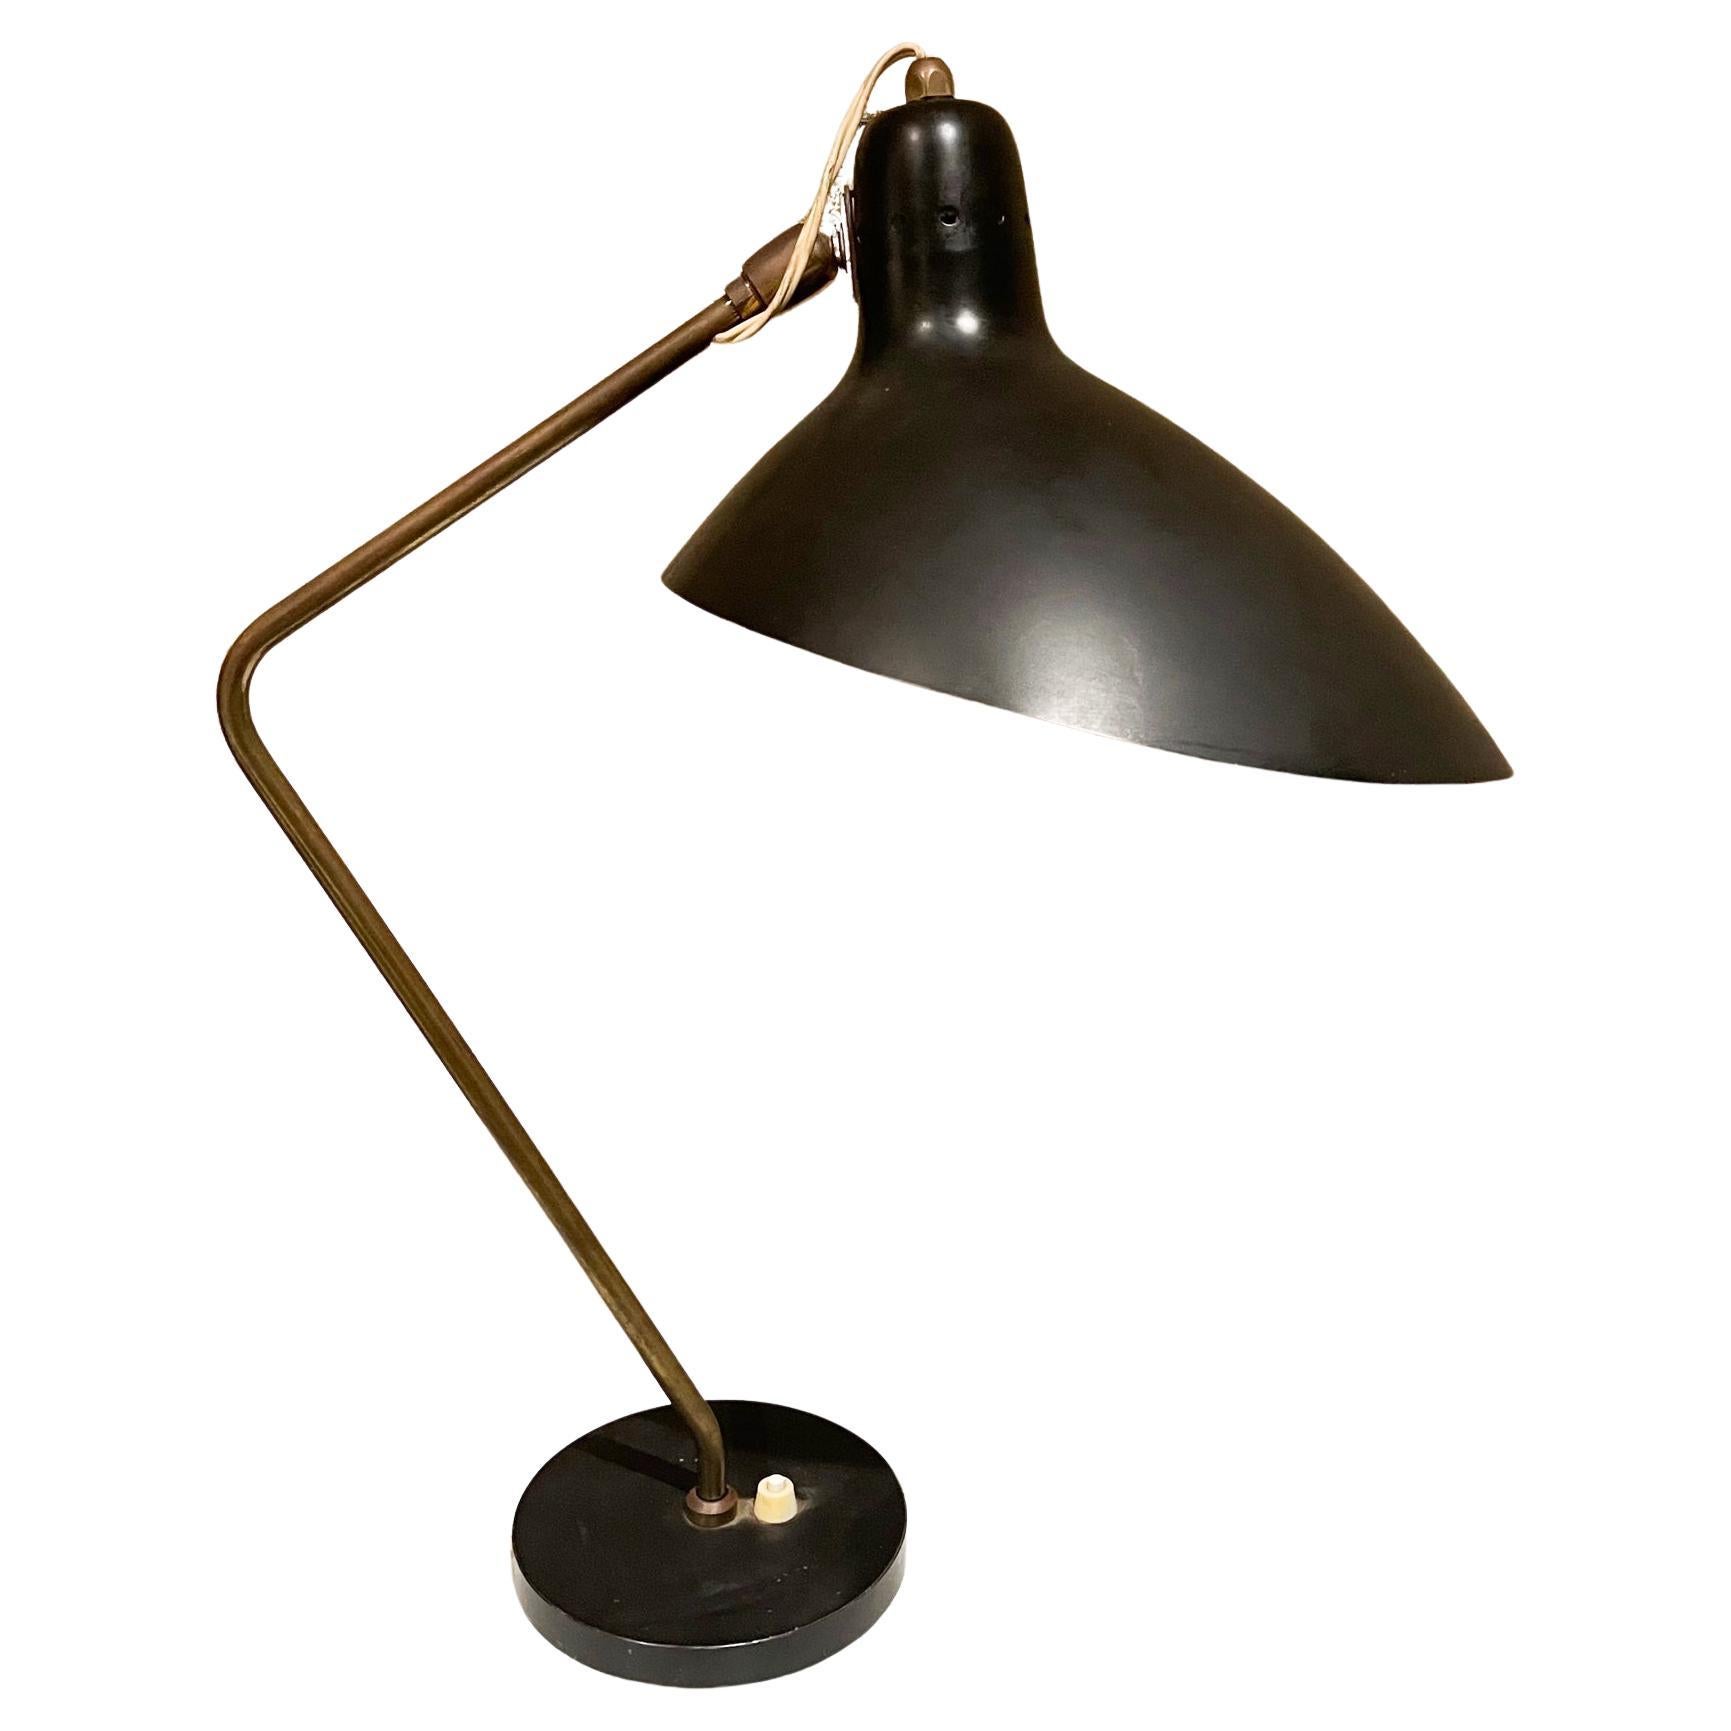 Vittoriano Vigano Sculptural French Table Lamp in Black and Brass France, 1950s For Sale